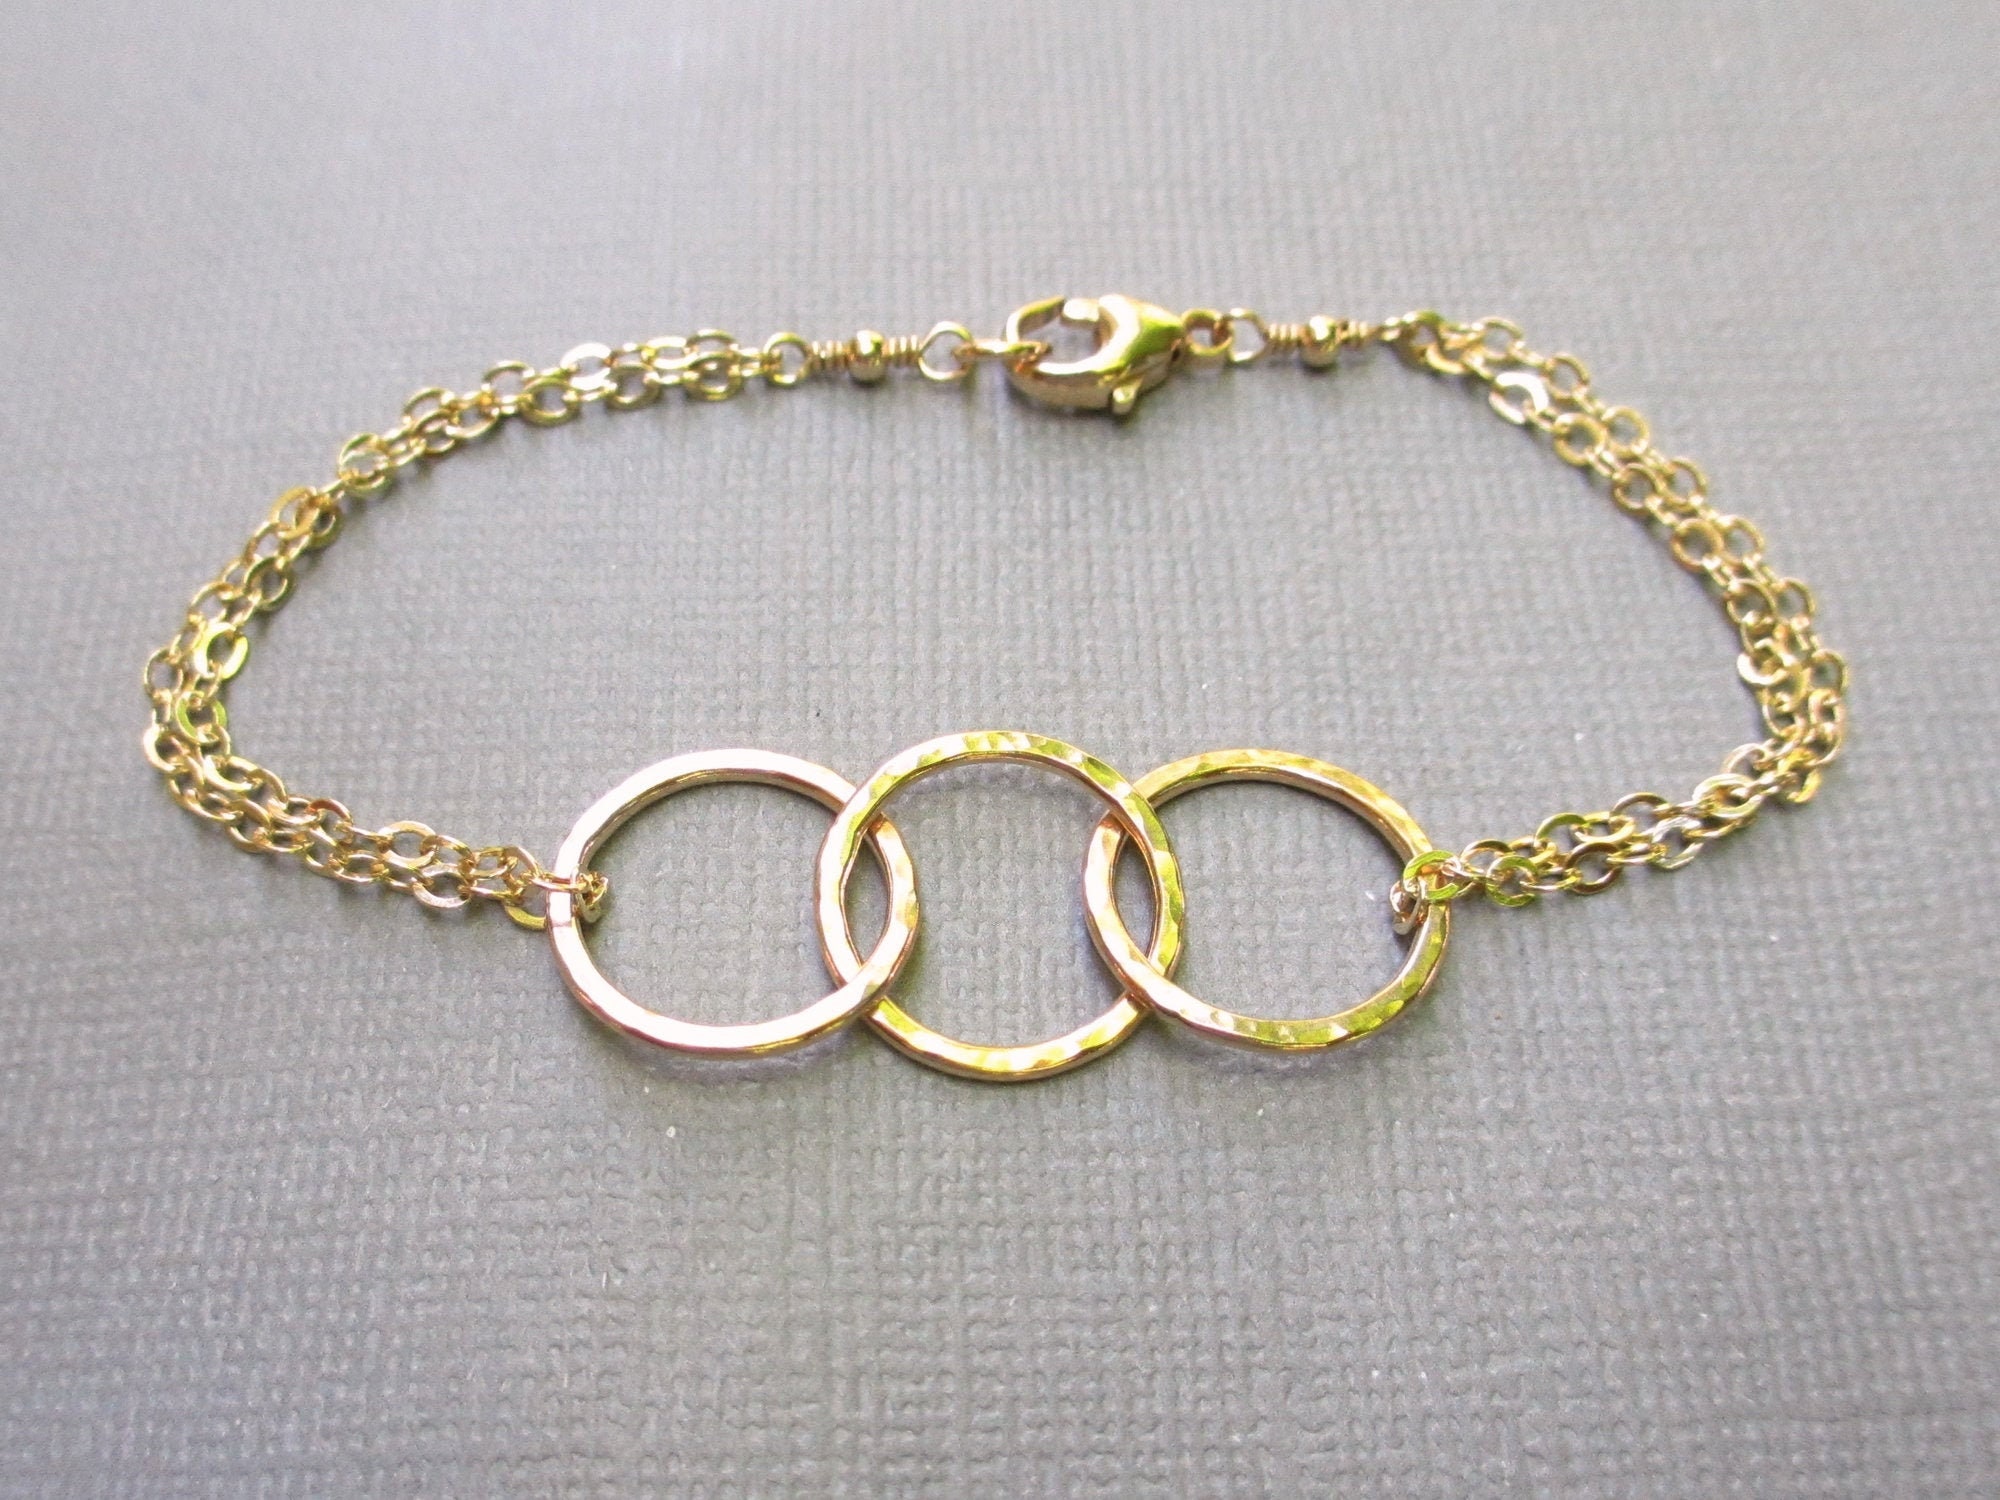 Large Oval Cable Chain Bracelet 7 inch in 14K Yellow Gold - M. Flynn